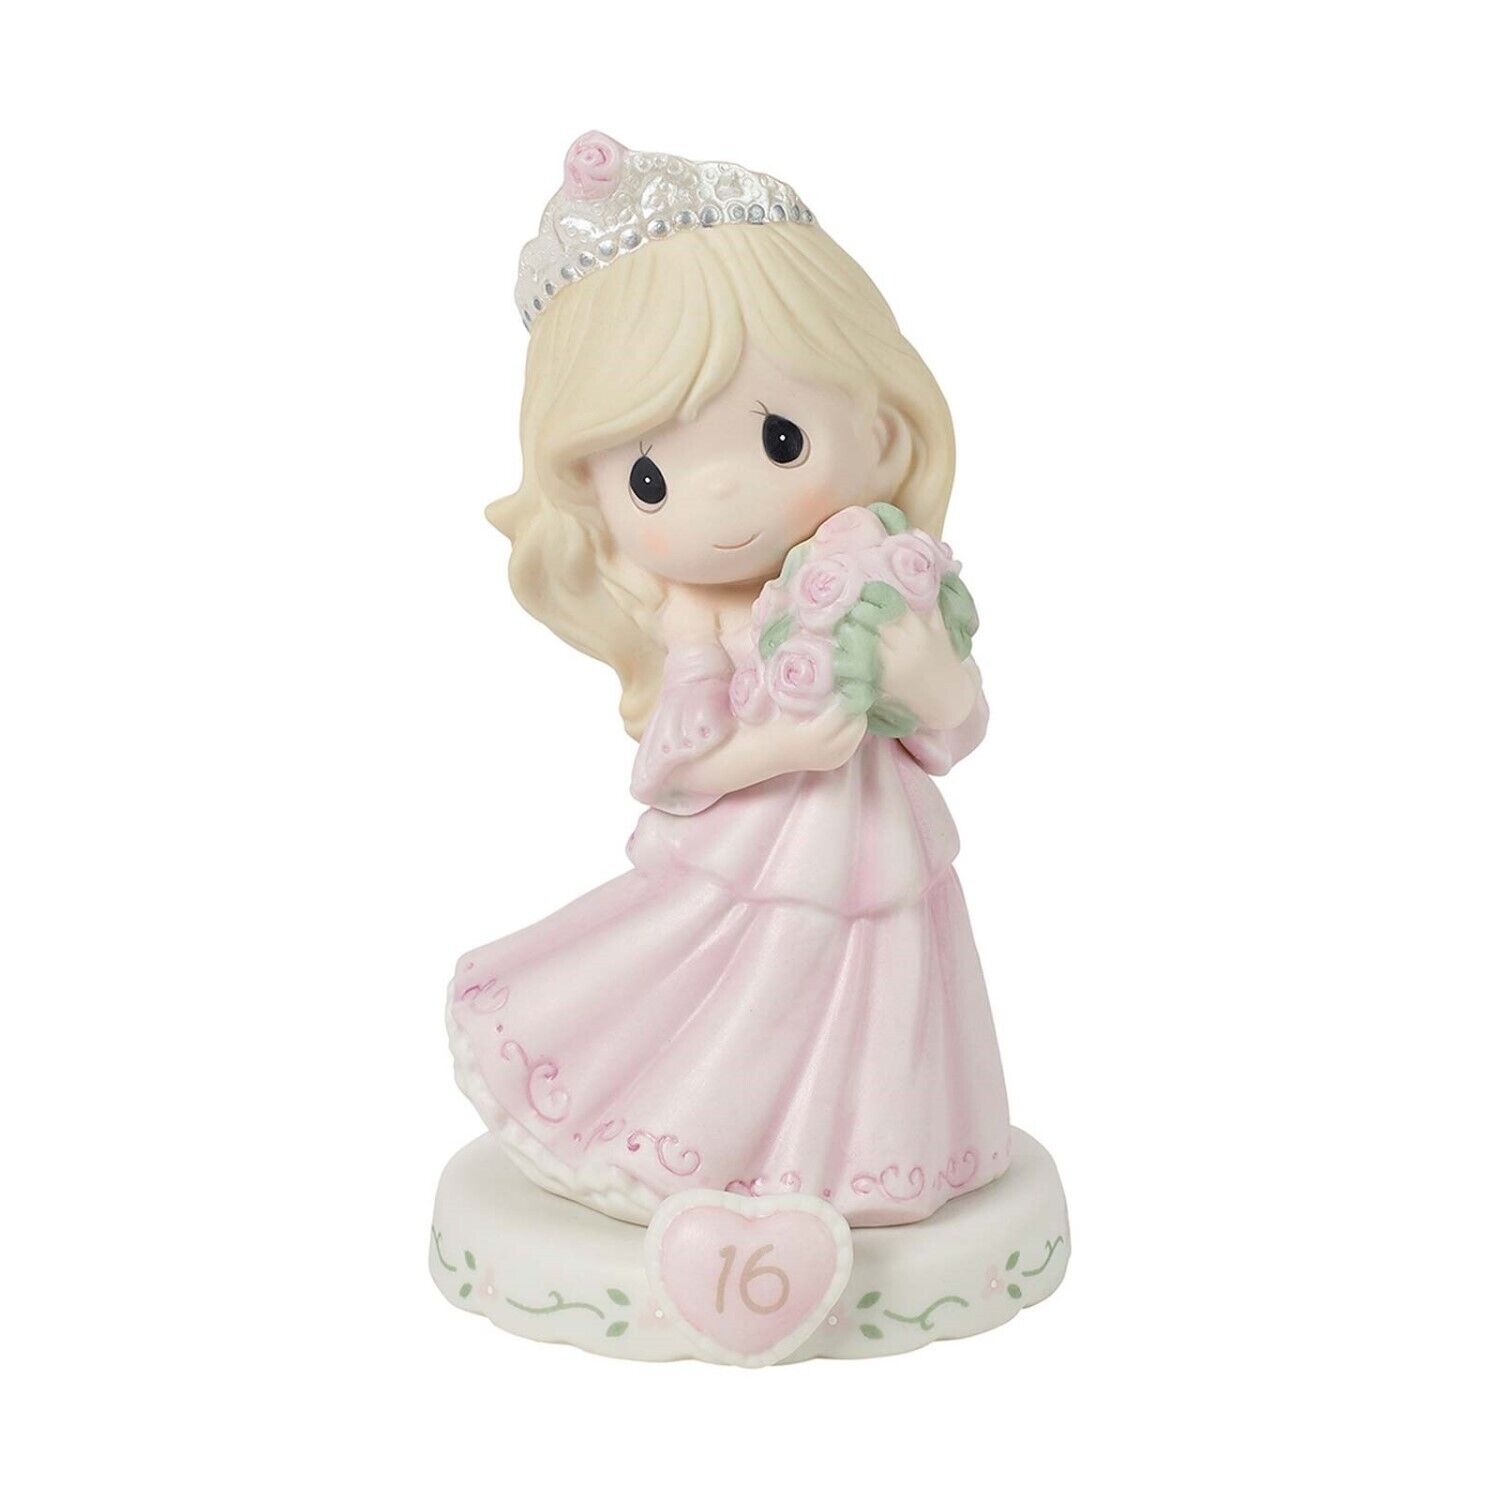 Growing in Grace Birthday Figurine Age 16 By Precious Moments 6in Blonde 162015